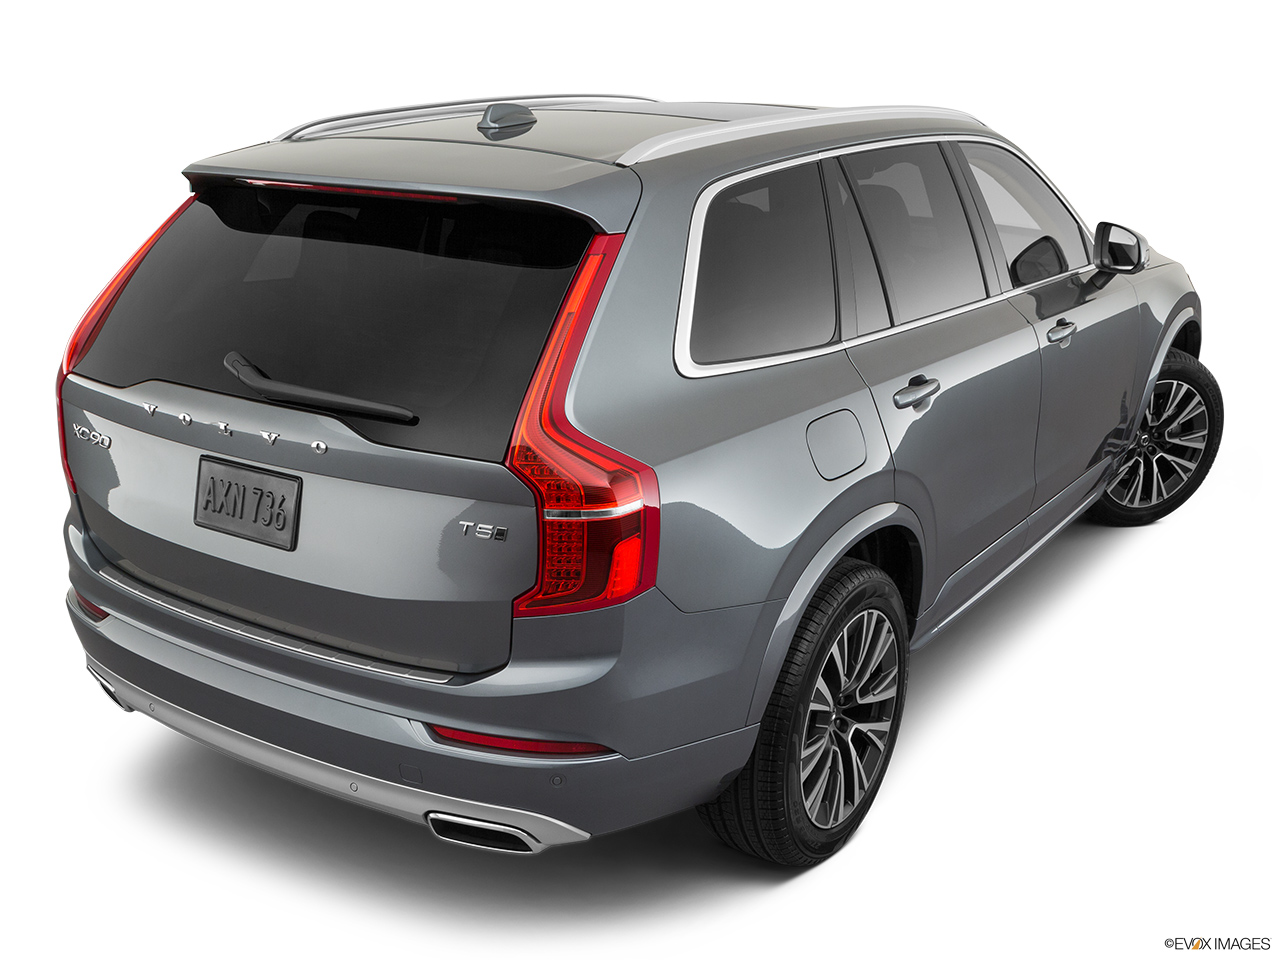 2020 Volvo XC90 T5 Momentum Rear 3/4 angle view. 